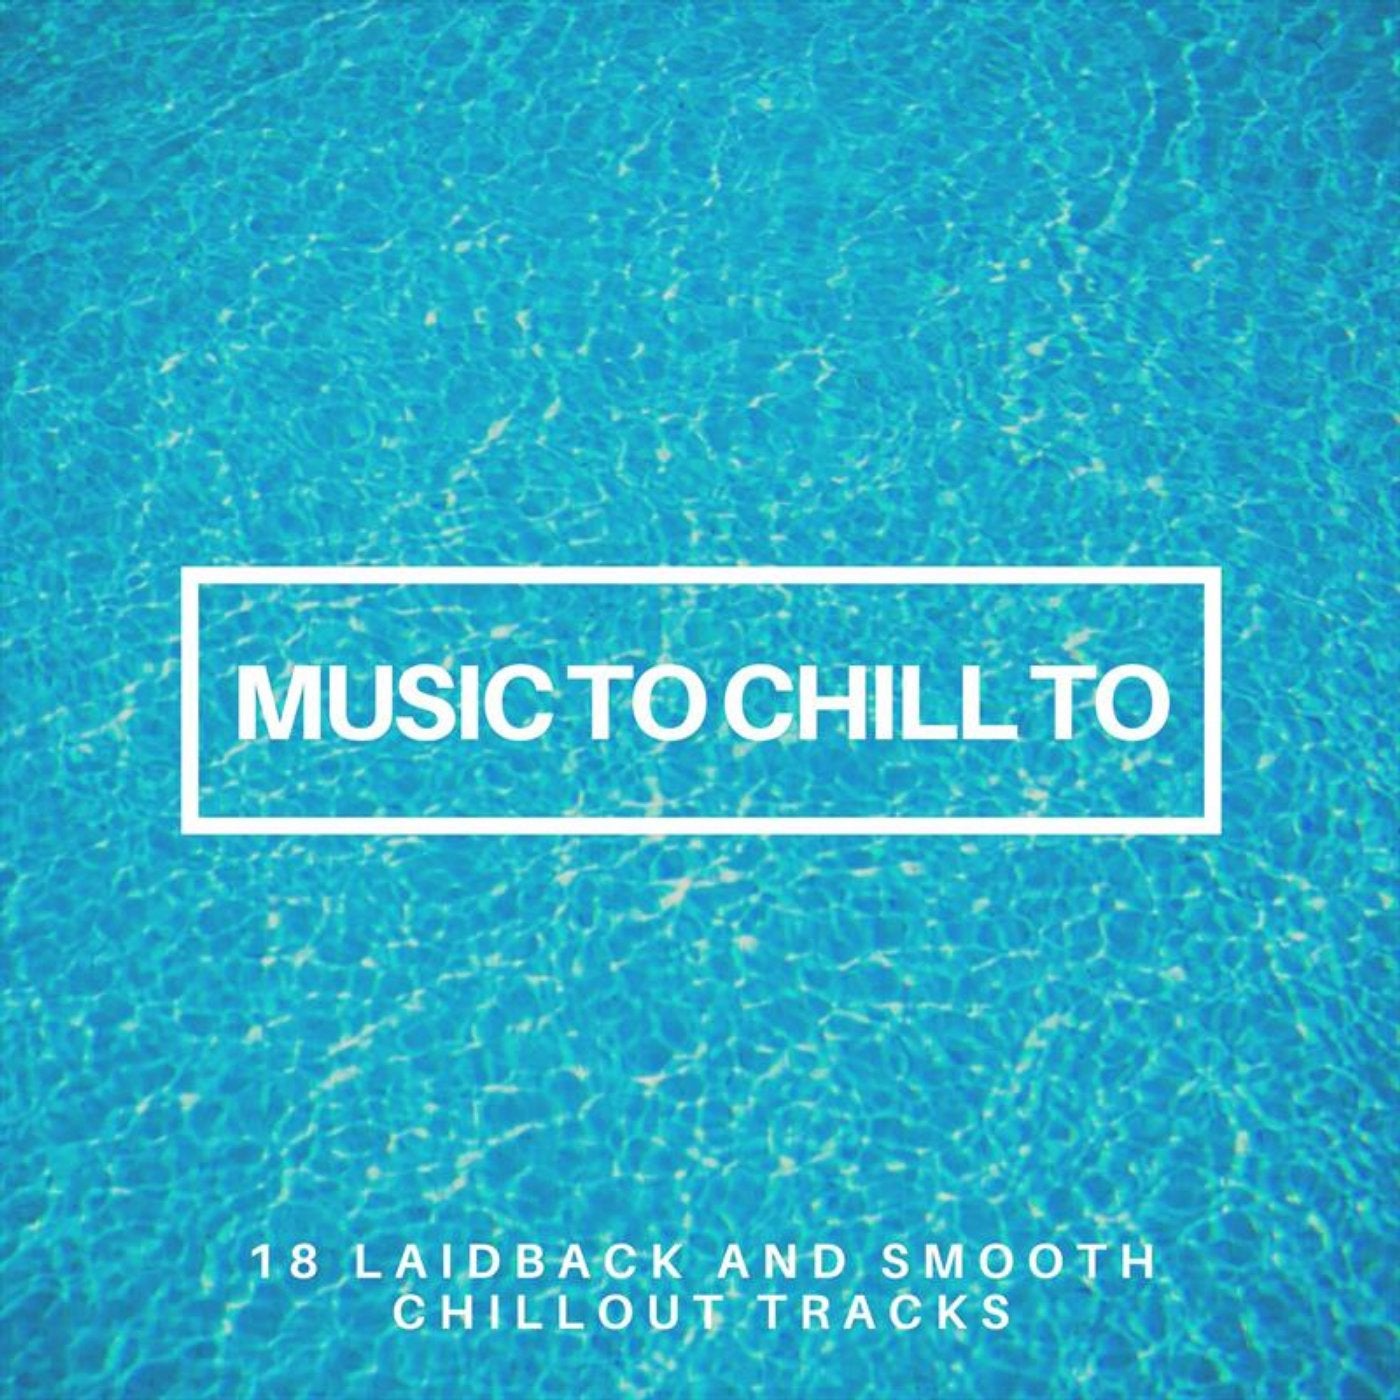 Music to Chill To: 18 Laidback and Smooth Chillout Tracks